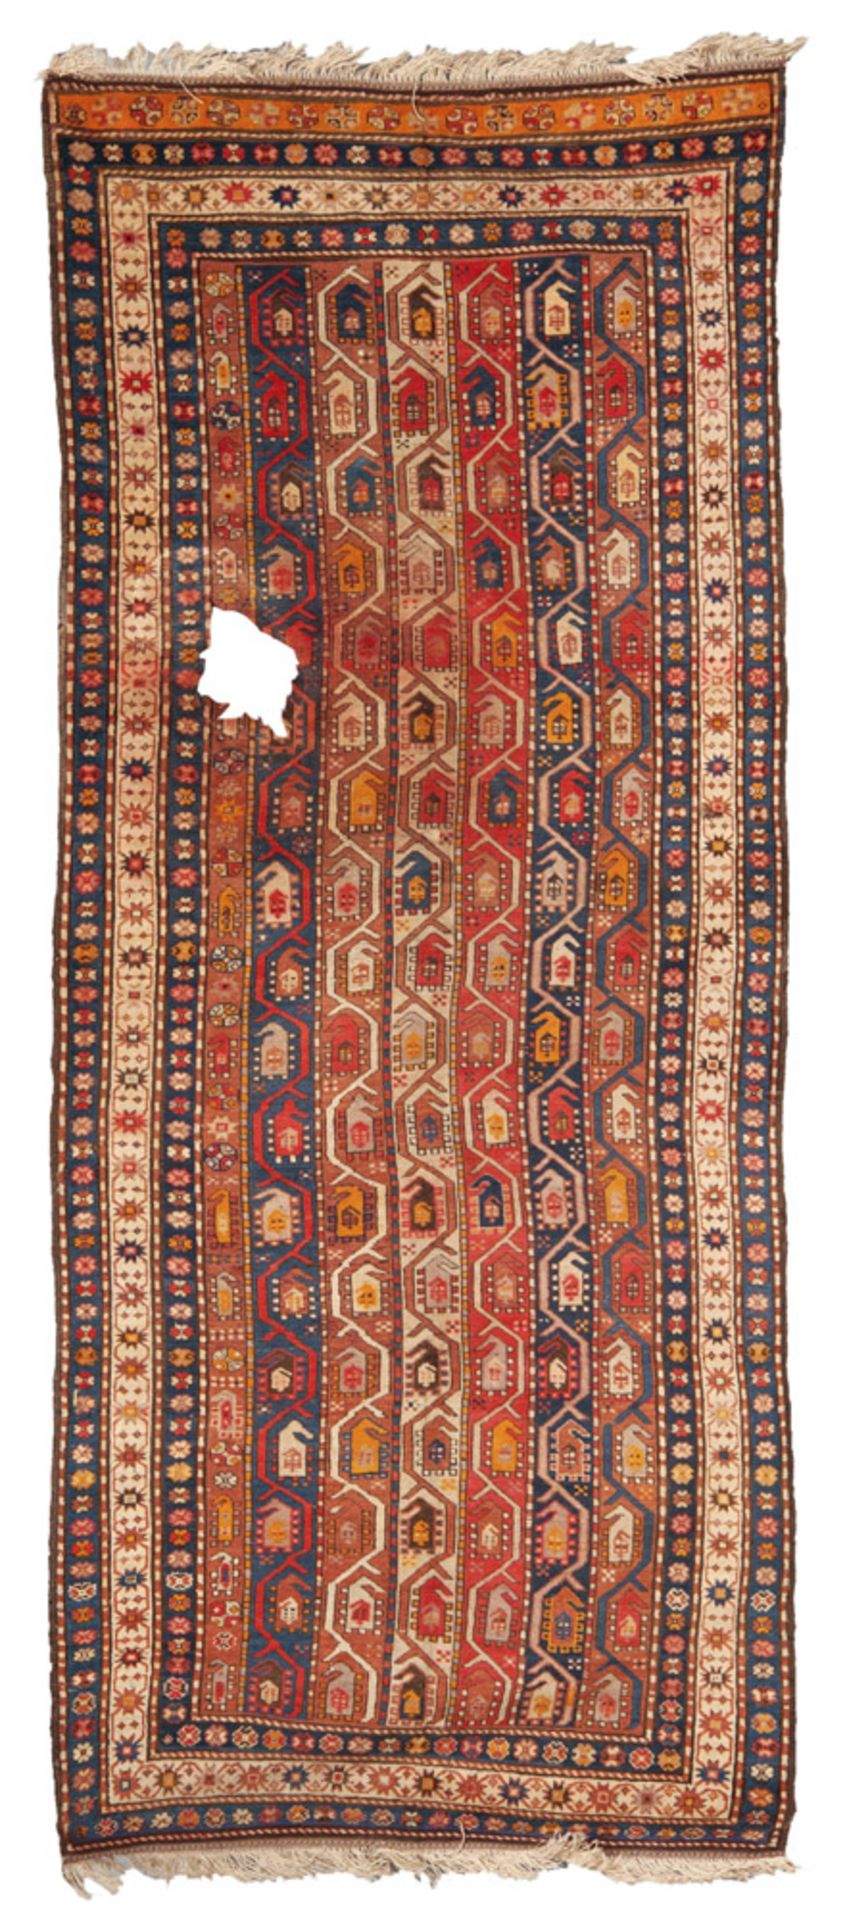 RARE CAUCASIAN DAGHESTAN CARPET, LATE 19TH CENTURY with design of series of six columns with